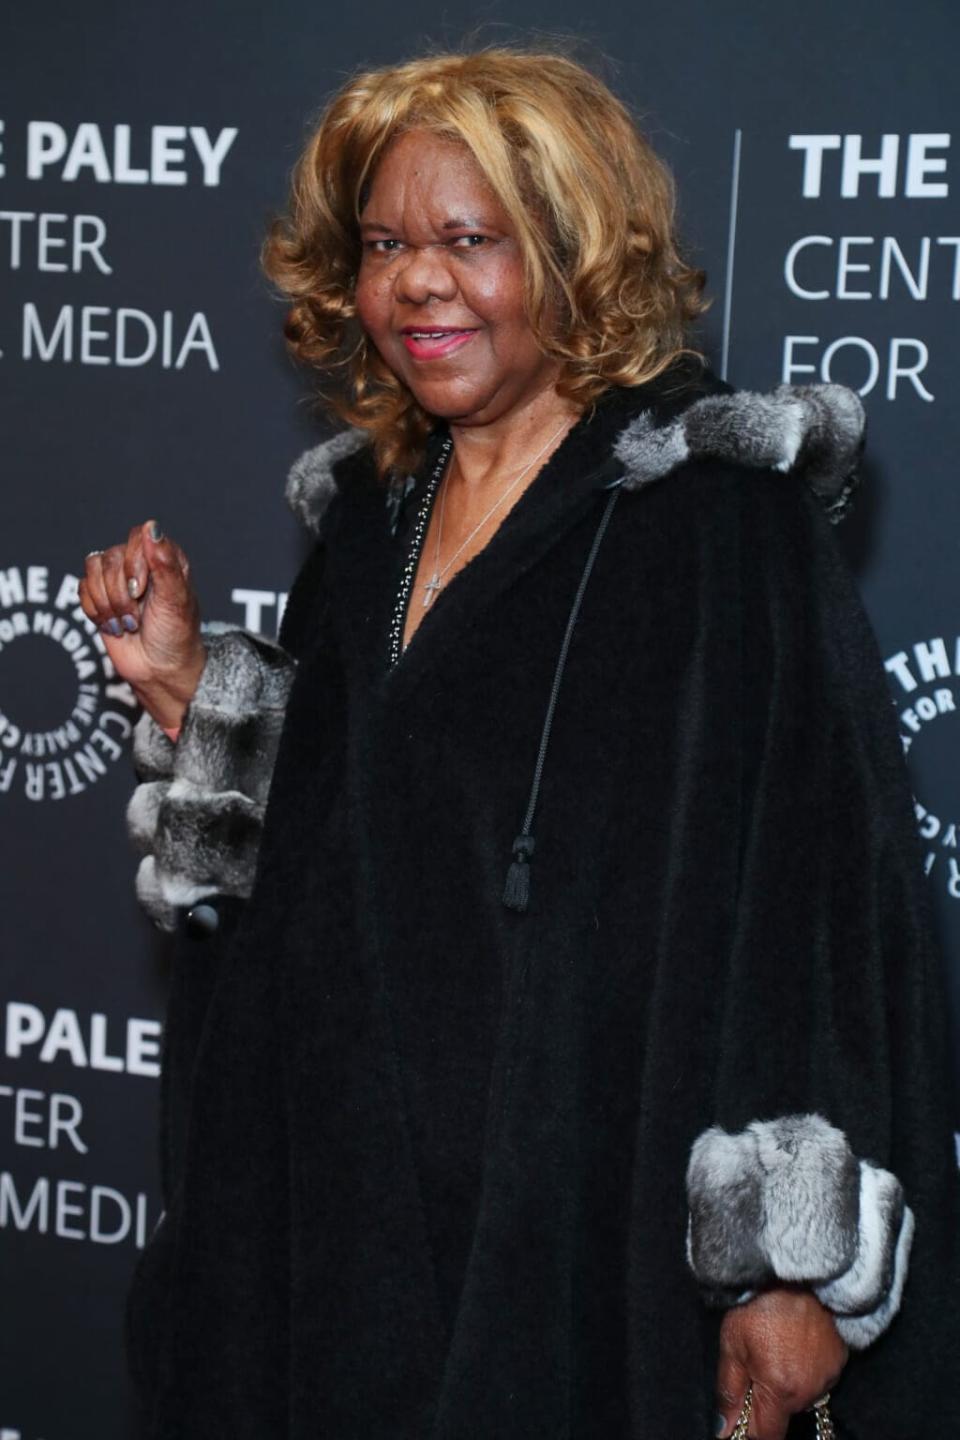 BEVERLY HILLS, CALIFORNIA – FEBRUARY 25: Janie Bradford attends The Paley Center For Media Hosts A Legendary Evening With Mary Wilson at The Paley Center for Media on February 25, 2019 in Beverly Hills, California. (Photo by Leon Bennett/Getty Images)